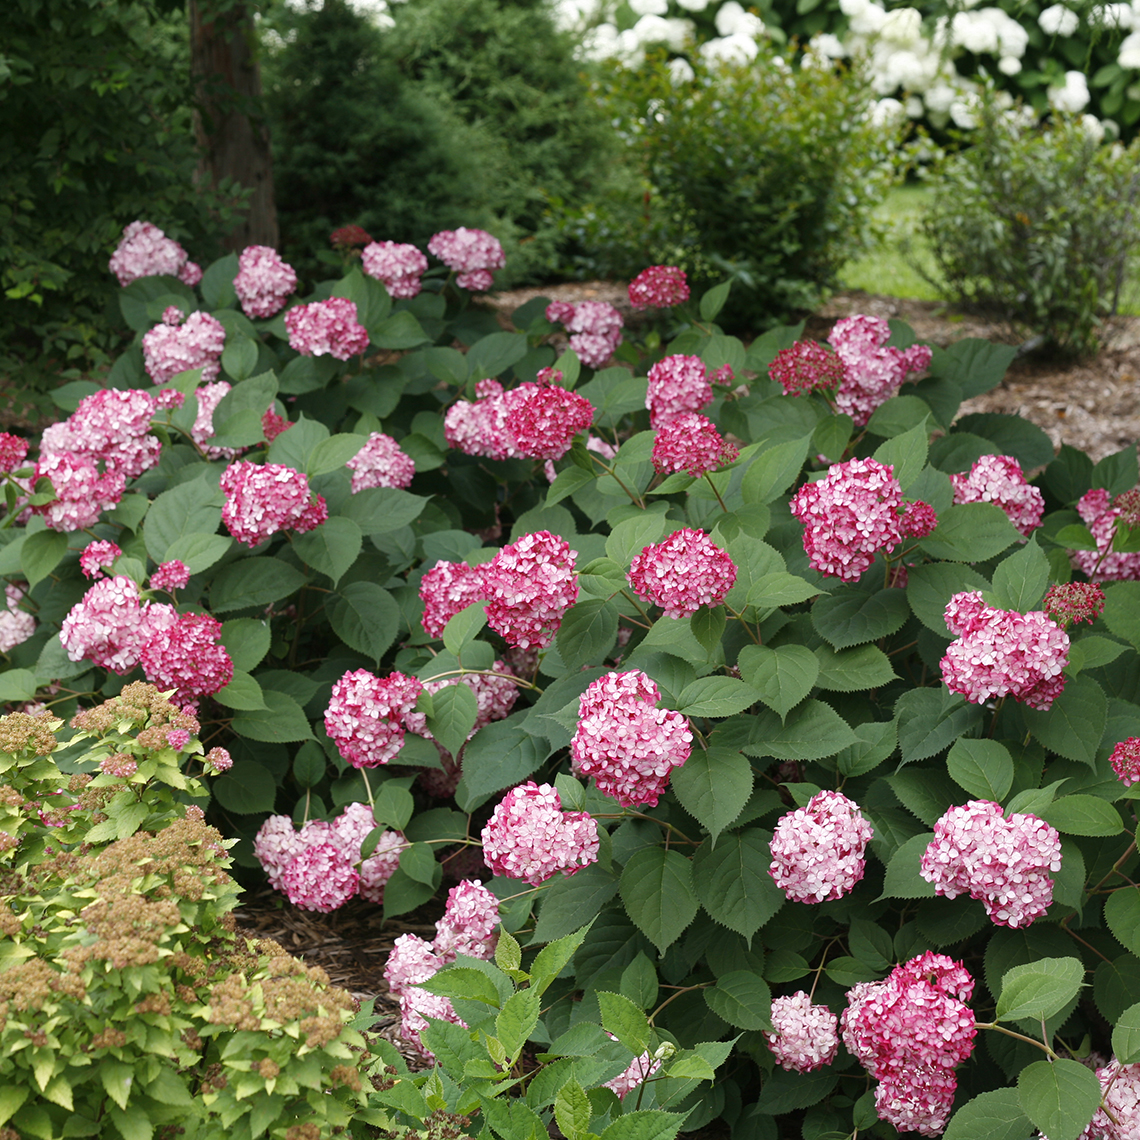 Two Invincibelle Ruby hydrangeas covered in pink blooms